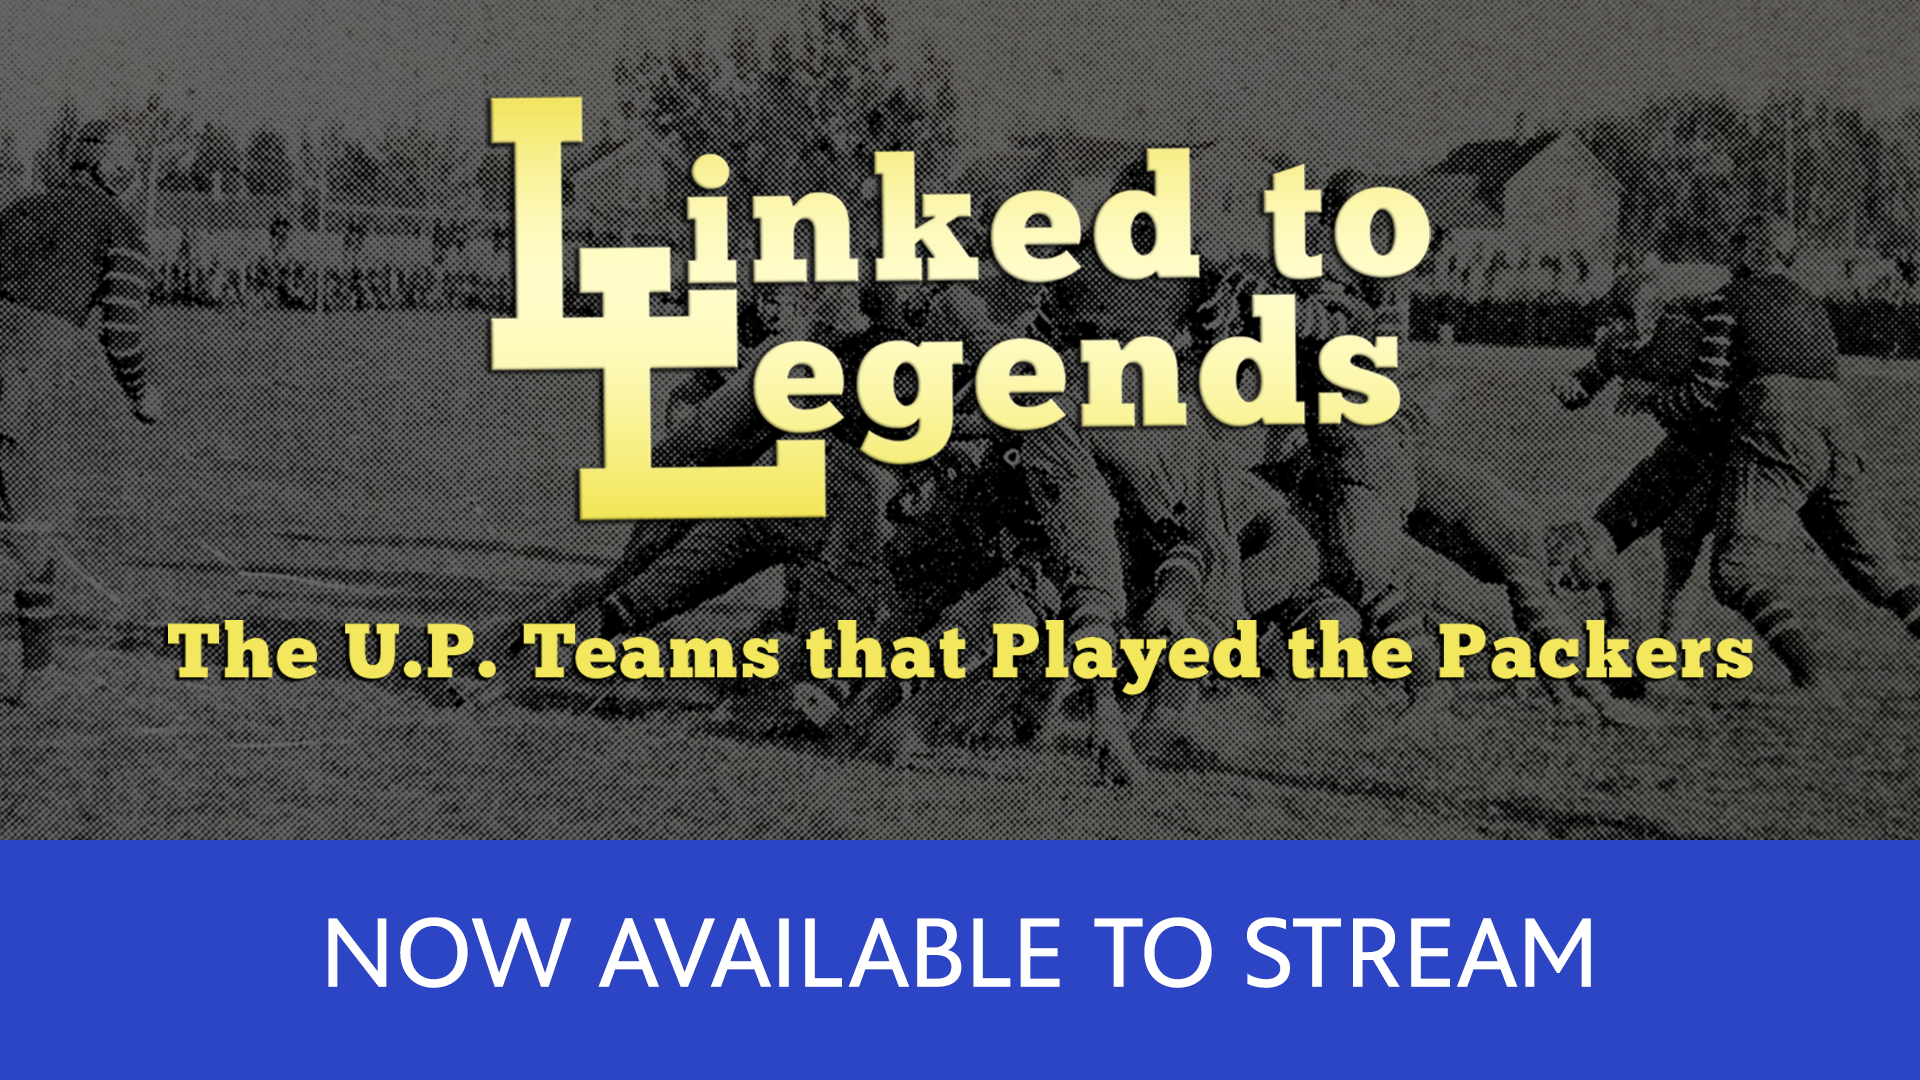 Linked to Legends: The U.P. Teams that Played the Packers Now Available to Stream